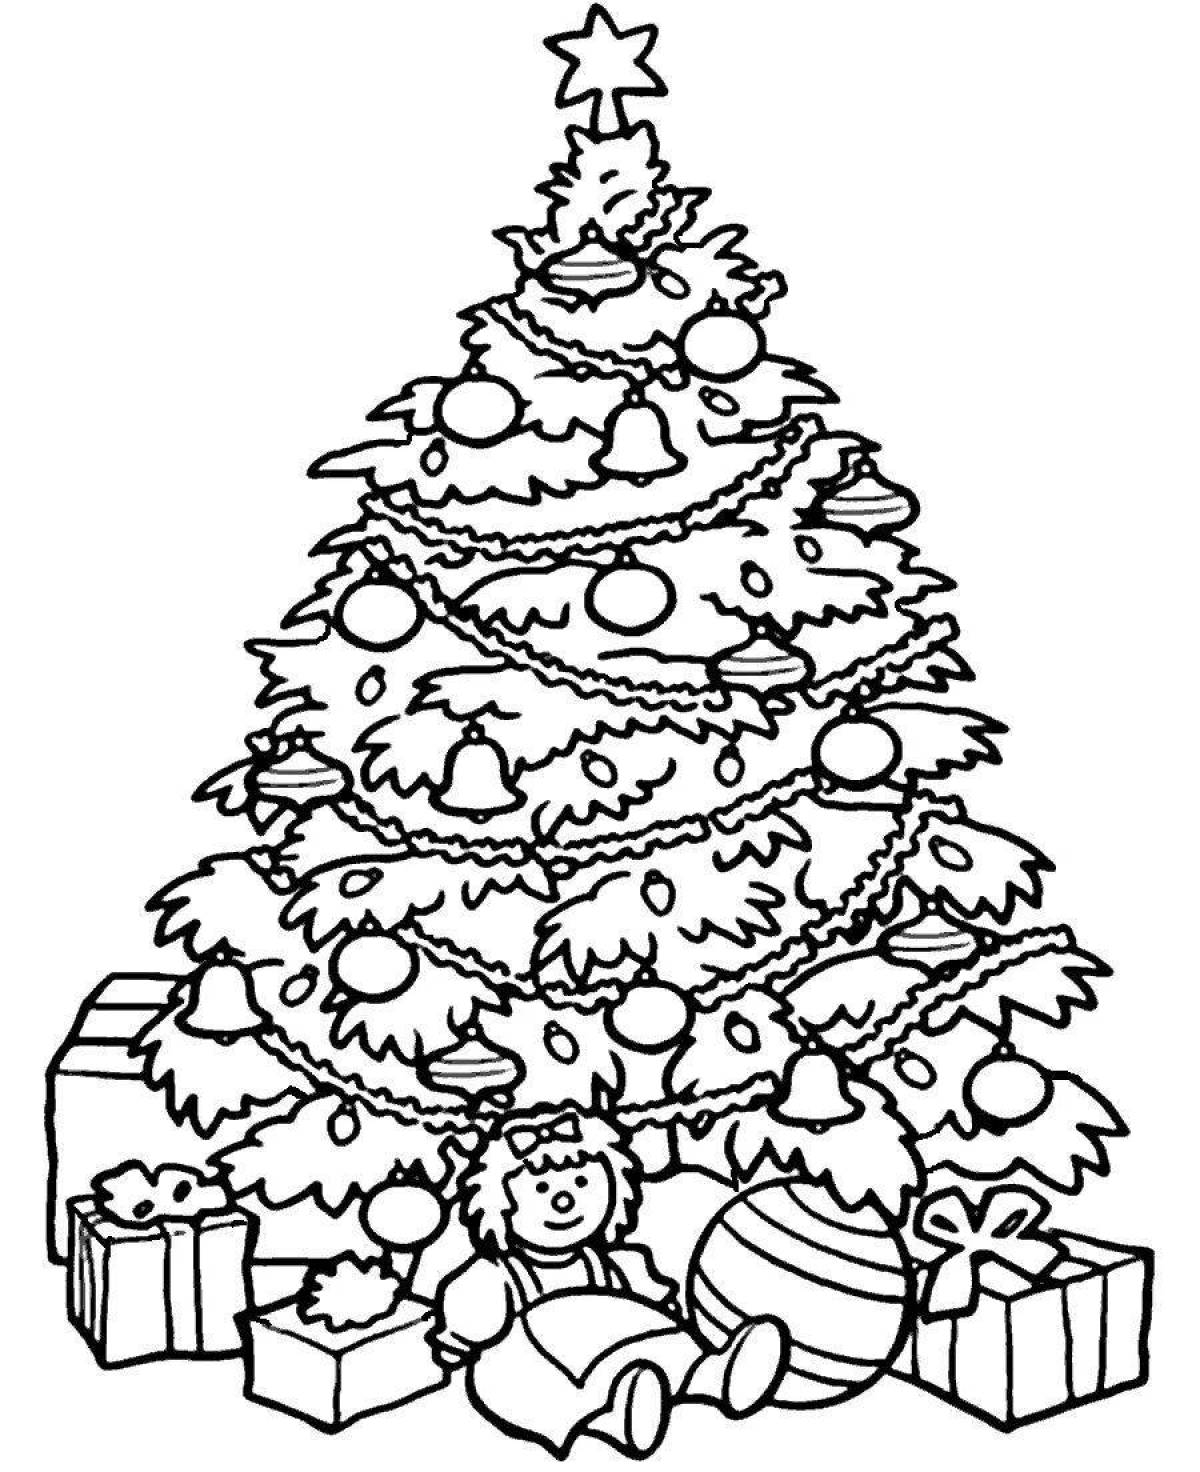 Spectacular Christmas coloring book